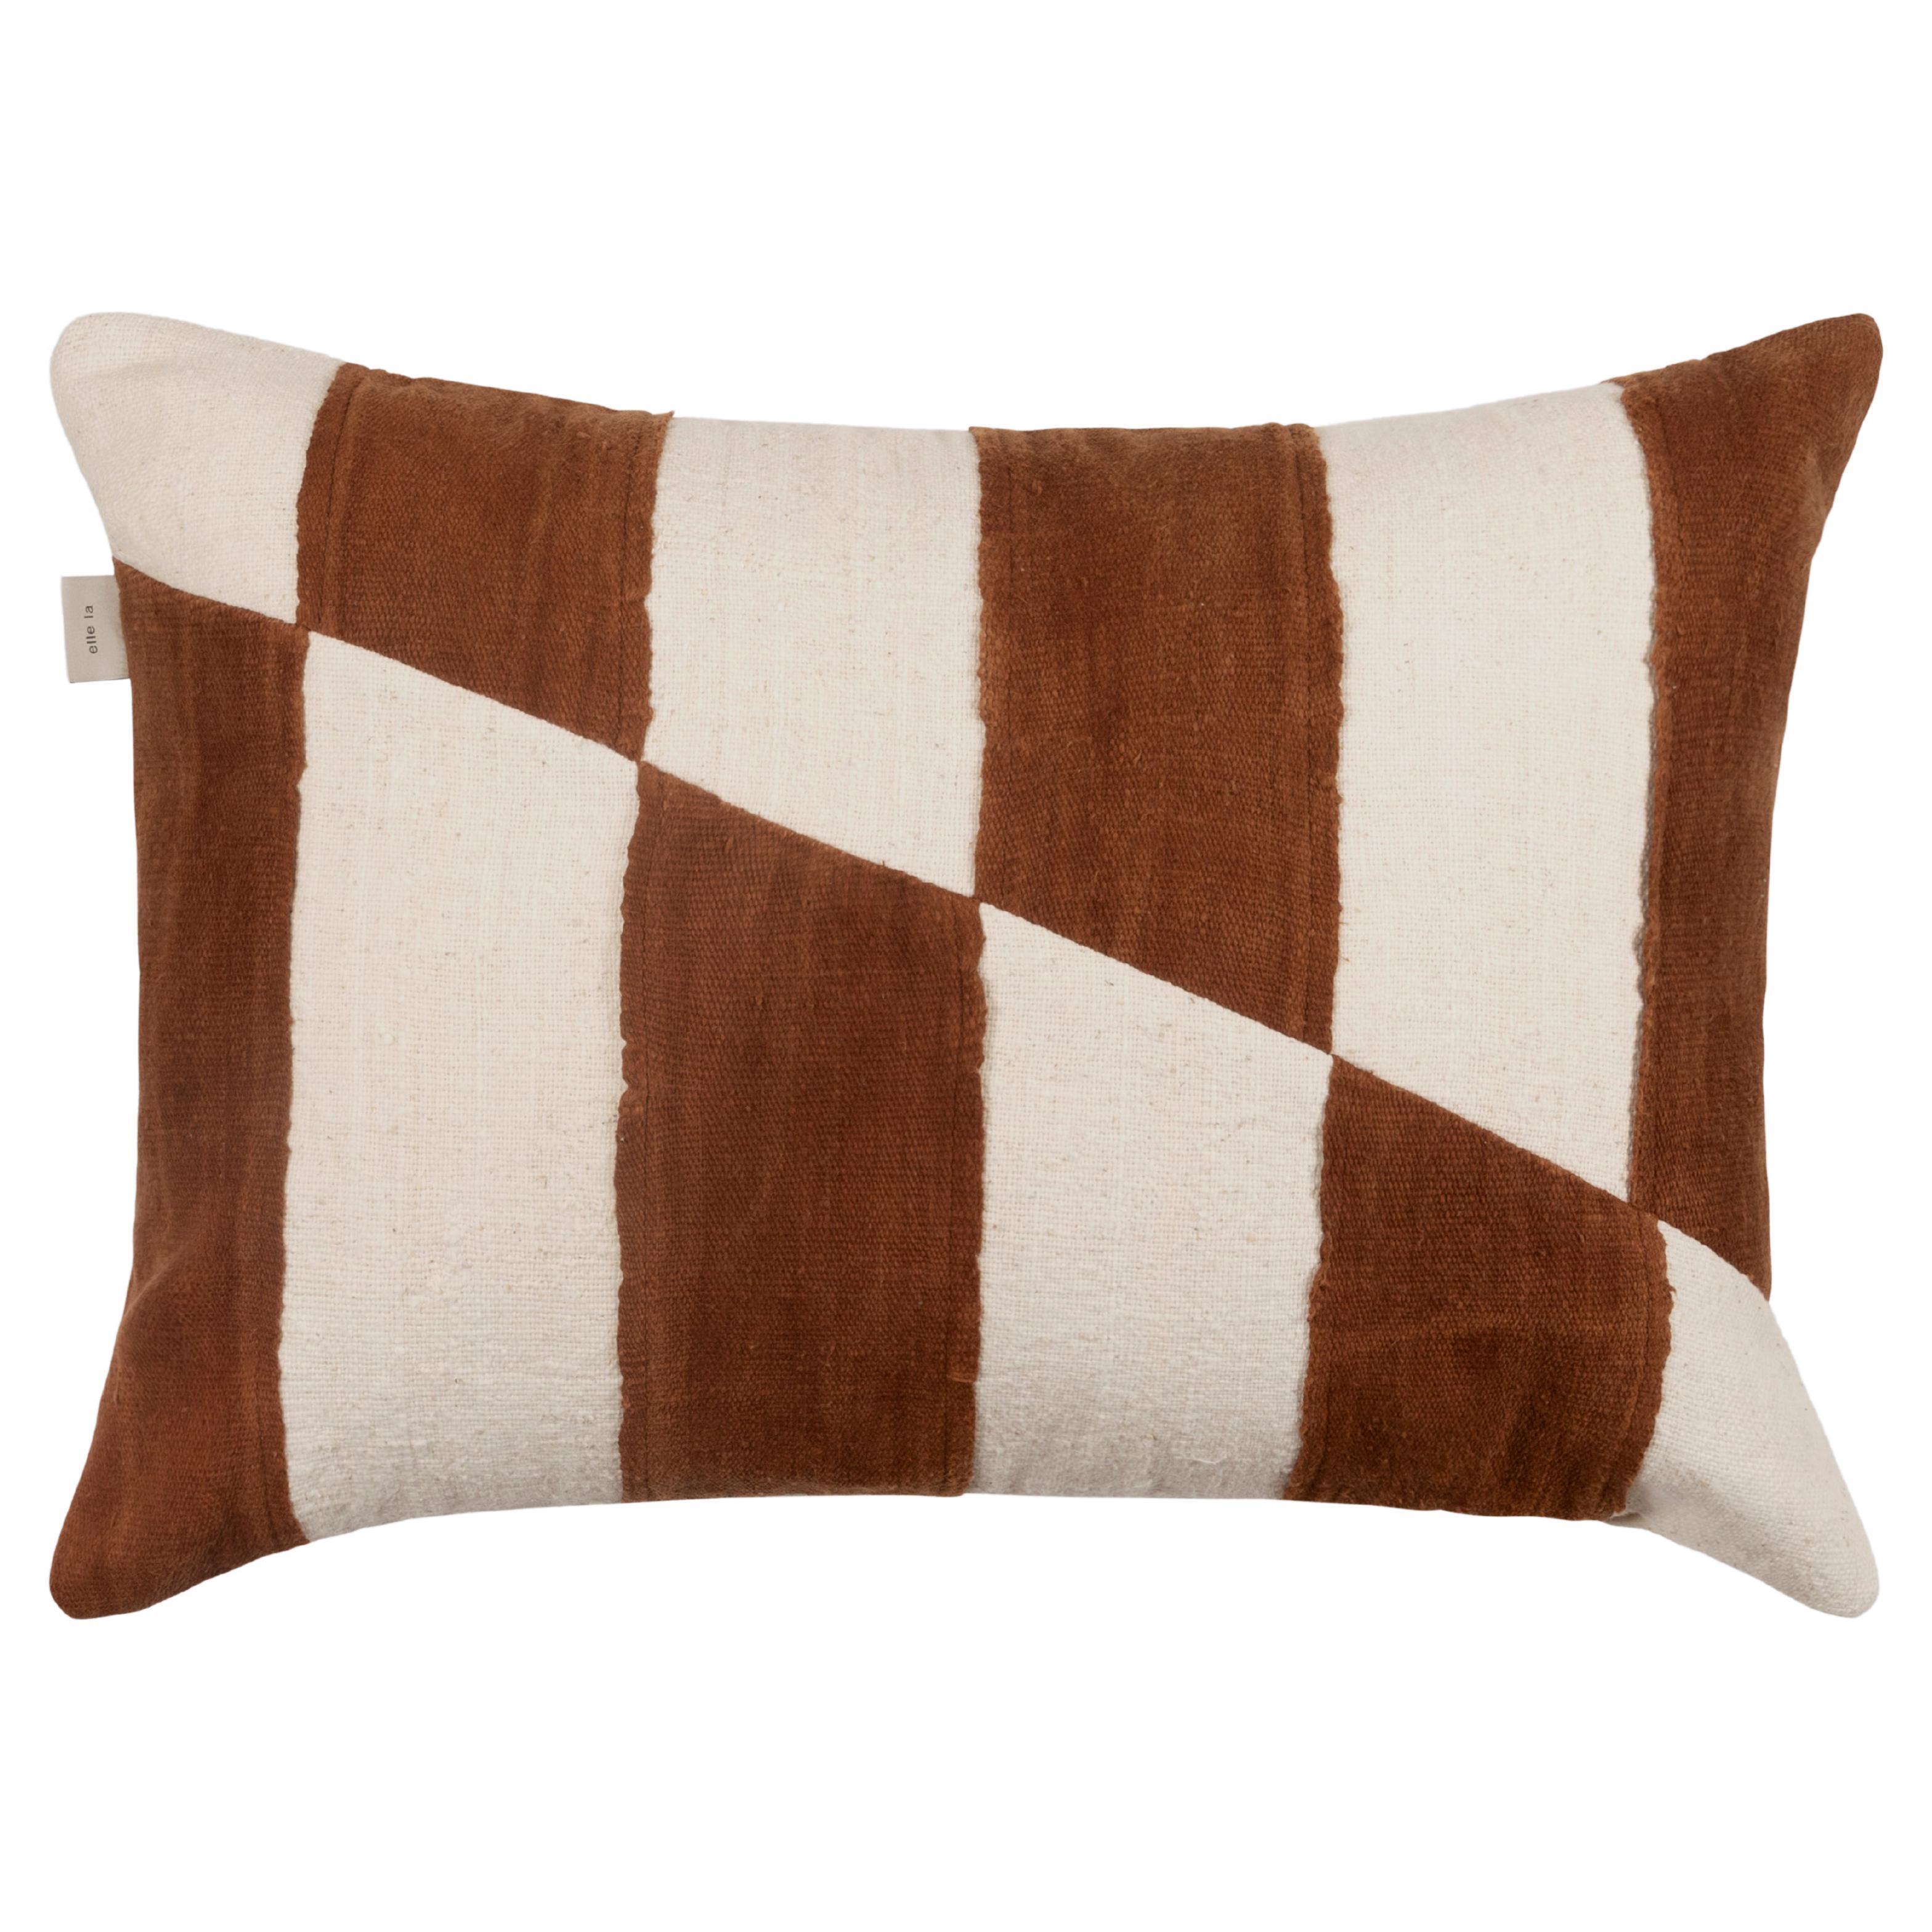 Contemporary Brown & White Cushion Cover from Handwoven Malian Cotton Fabrics For Sale